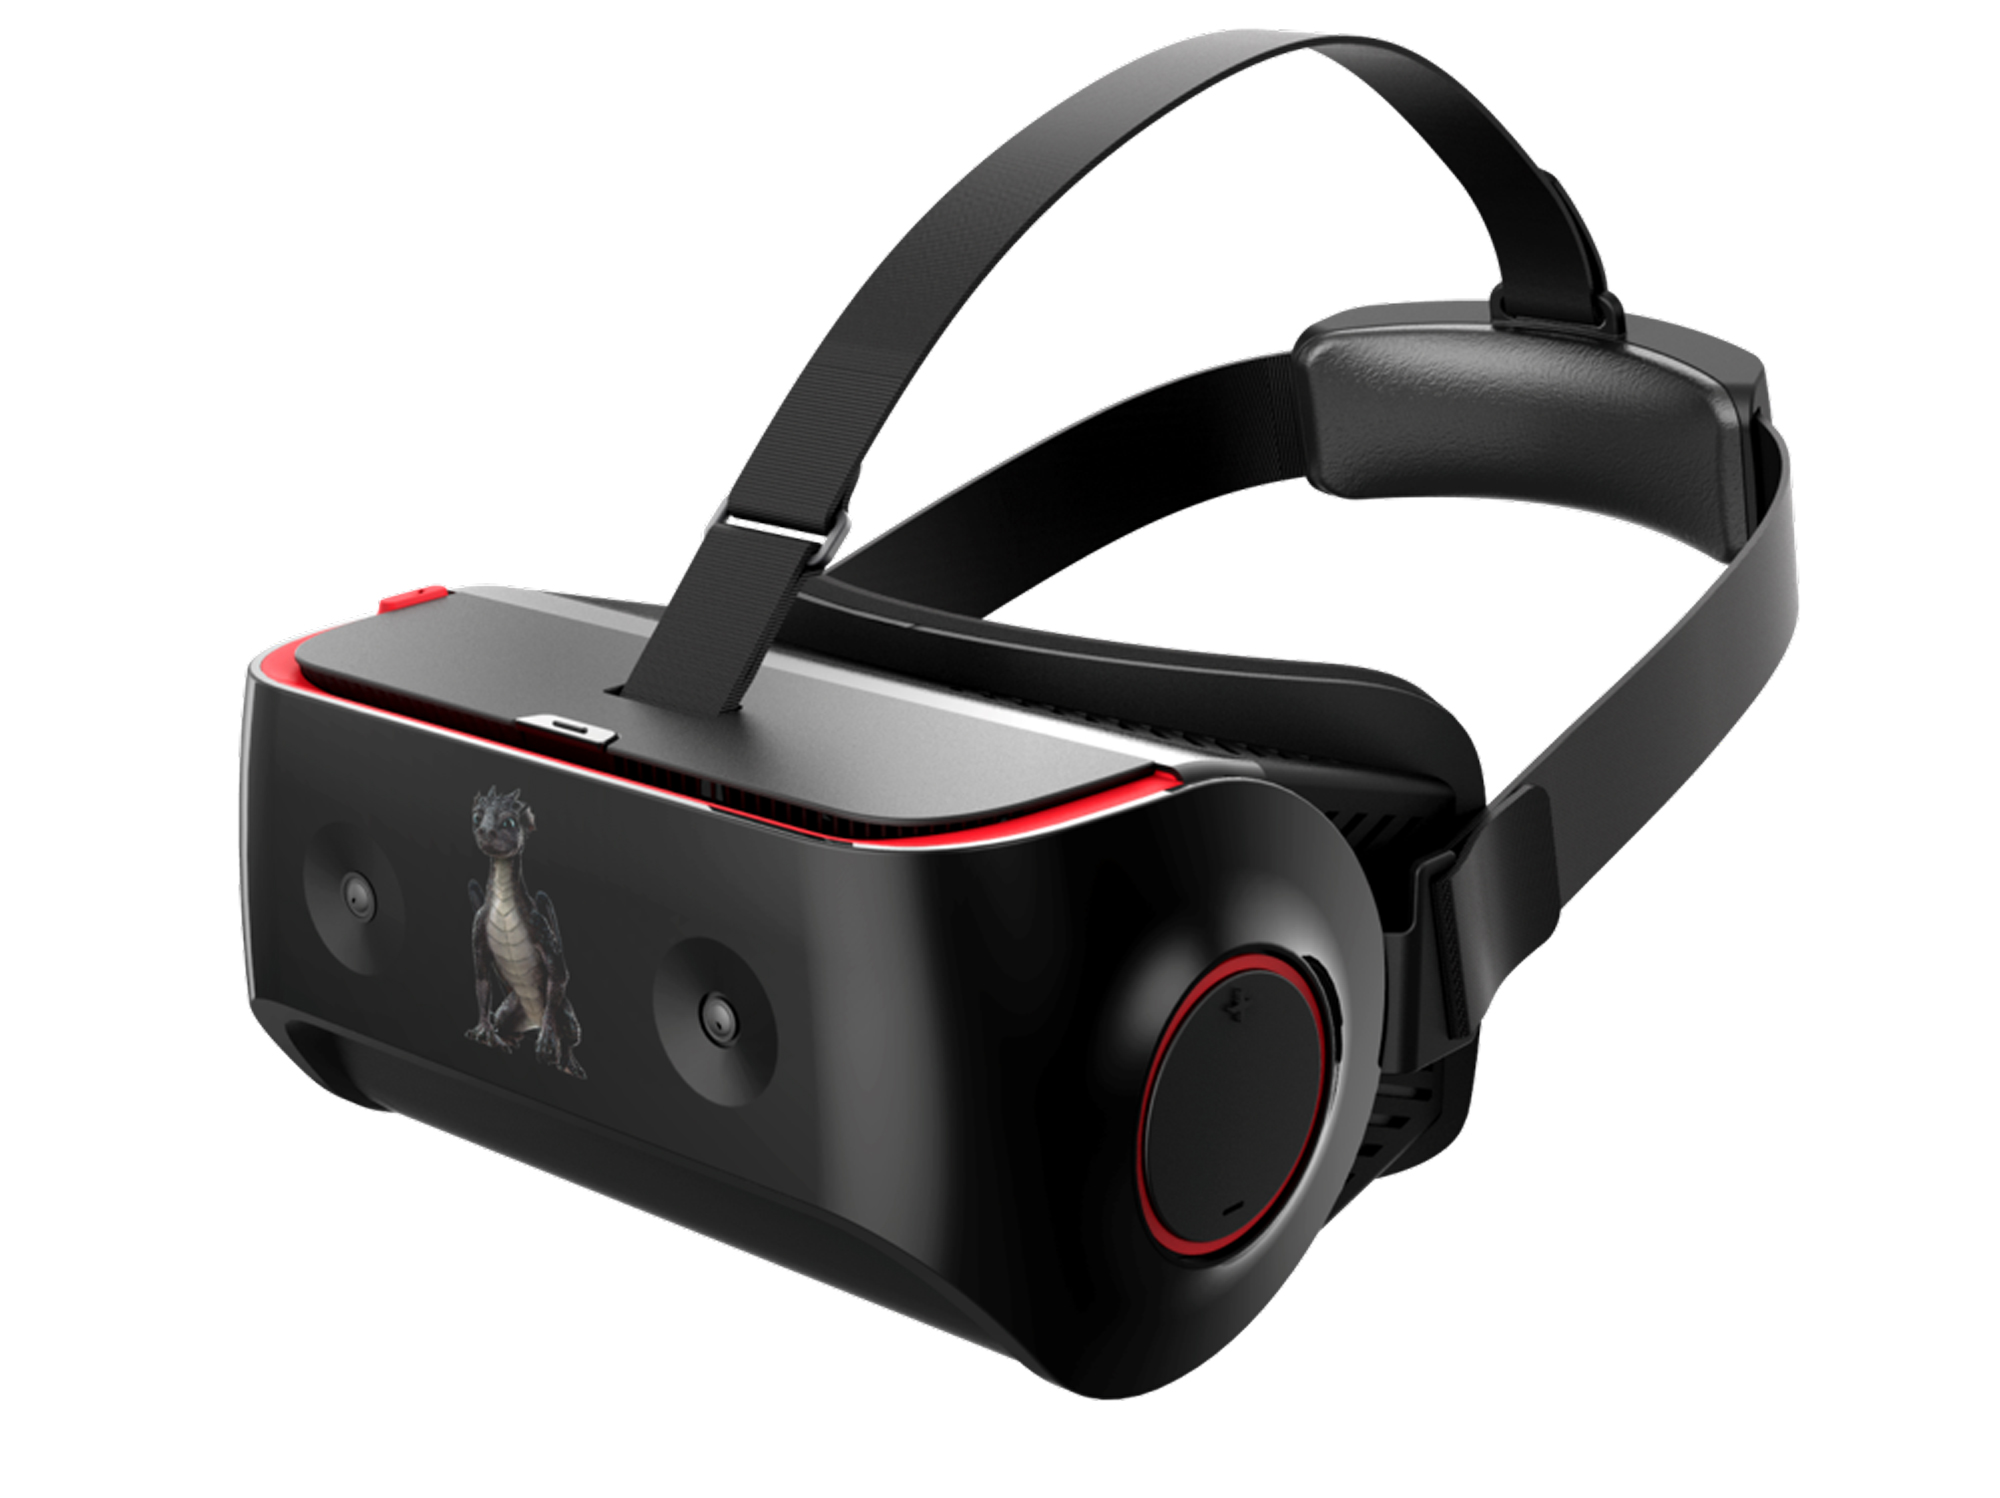 Qualcomm’s design for a virtual-reality headset eschews the cables seen in the leading devices on the market today.